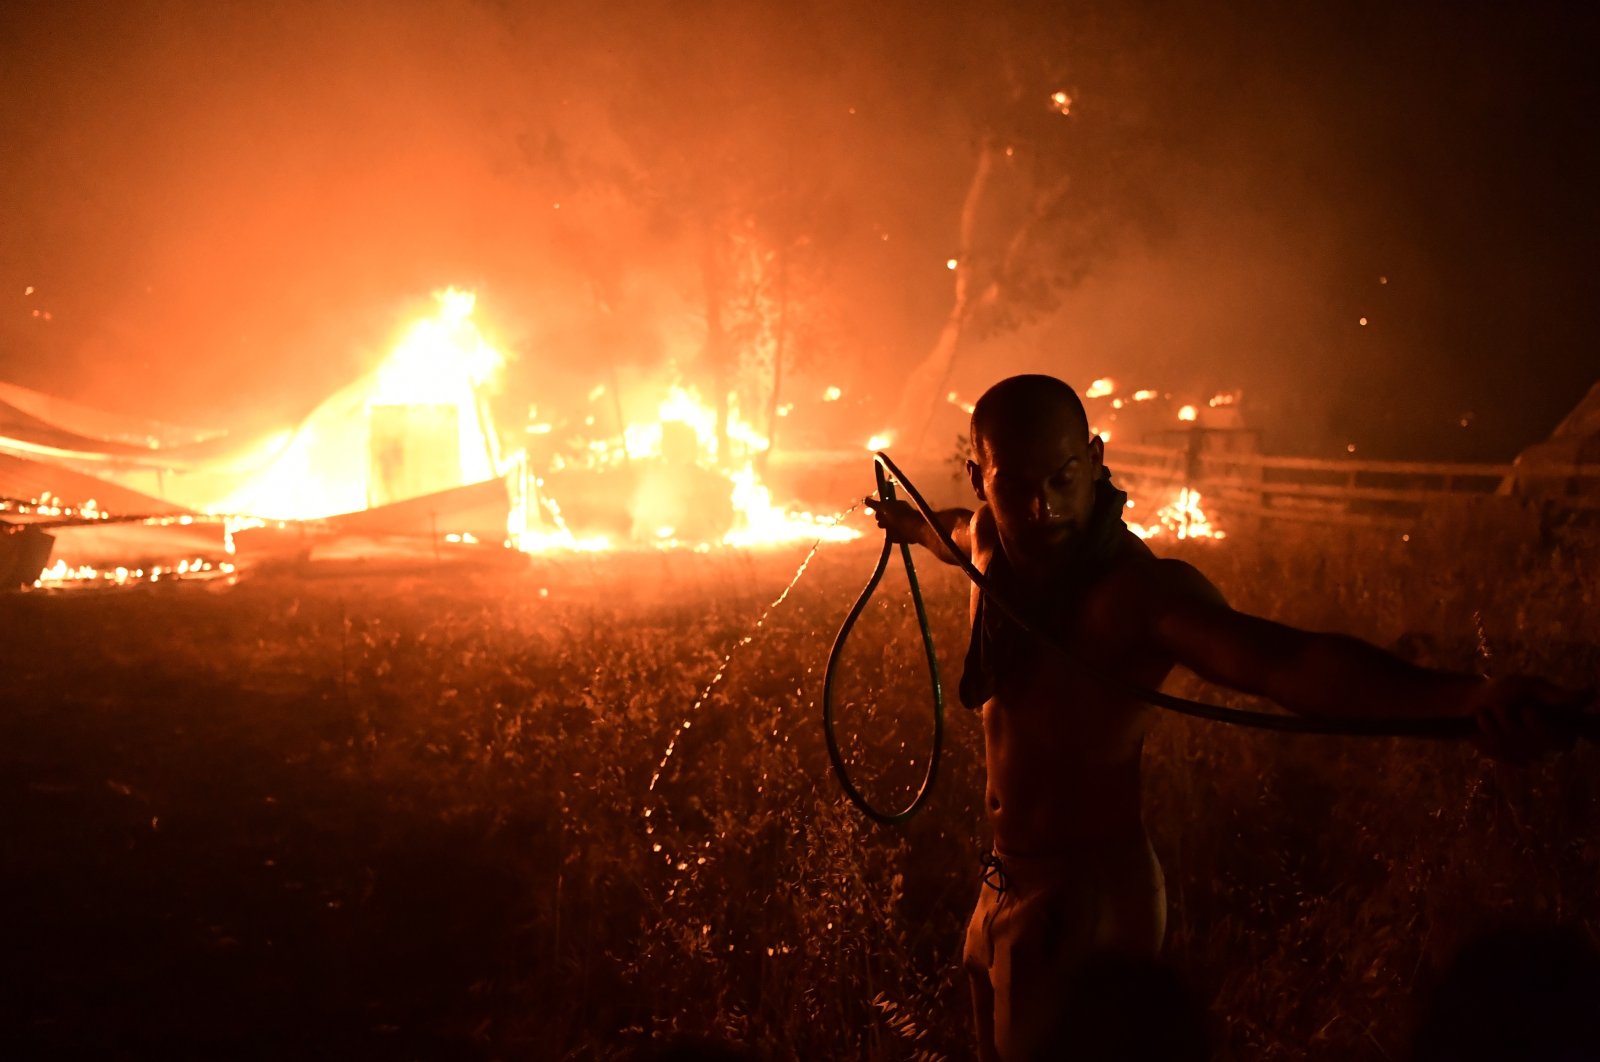 A man uses a water hose during a wildfire in Adames area, in northern Athens, Greece, Aug. 3, 2021. (AP Photo)